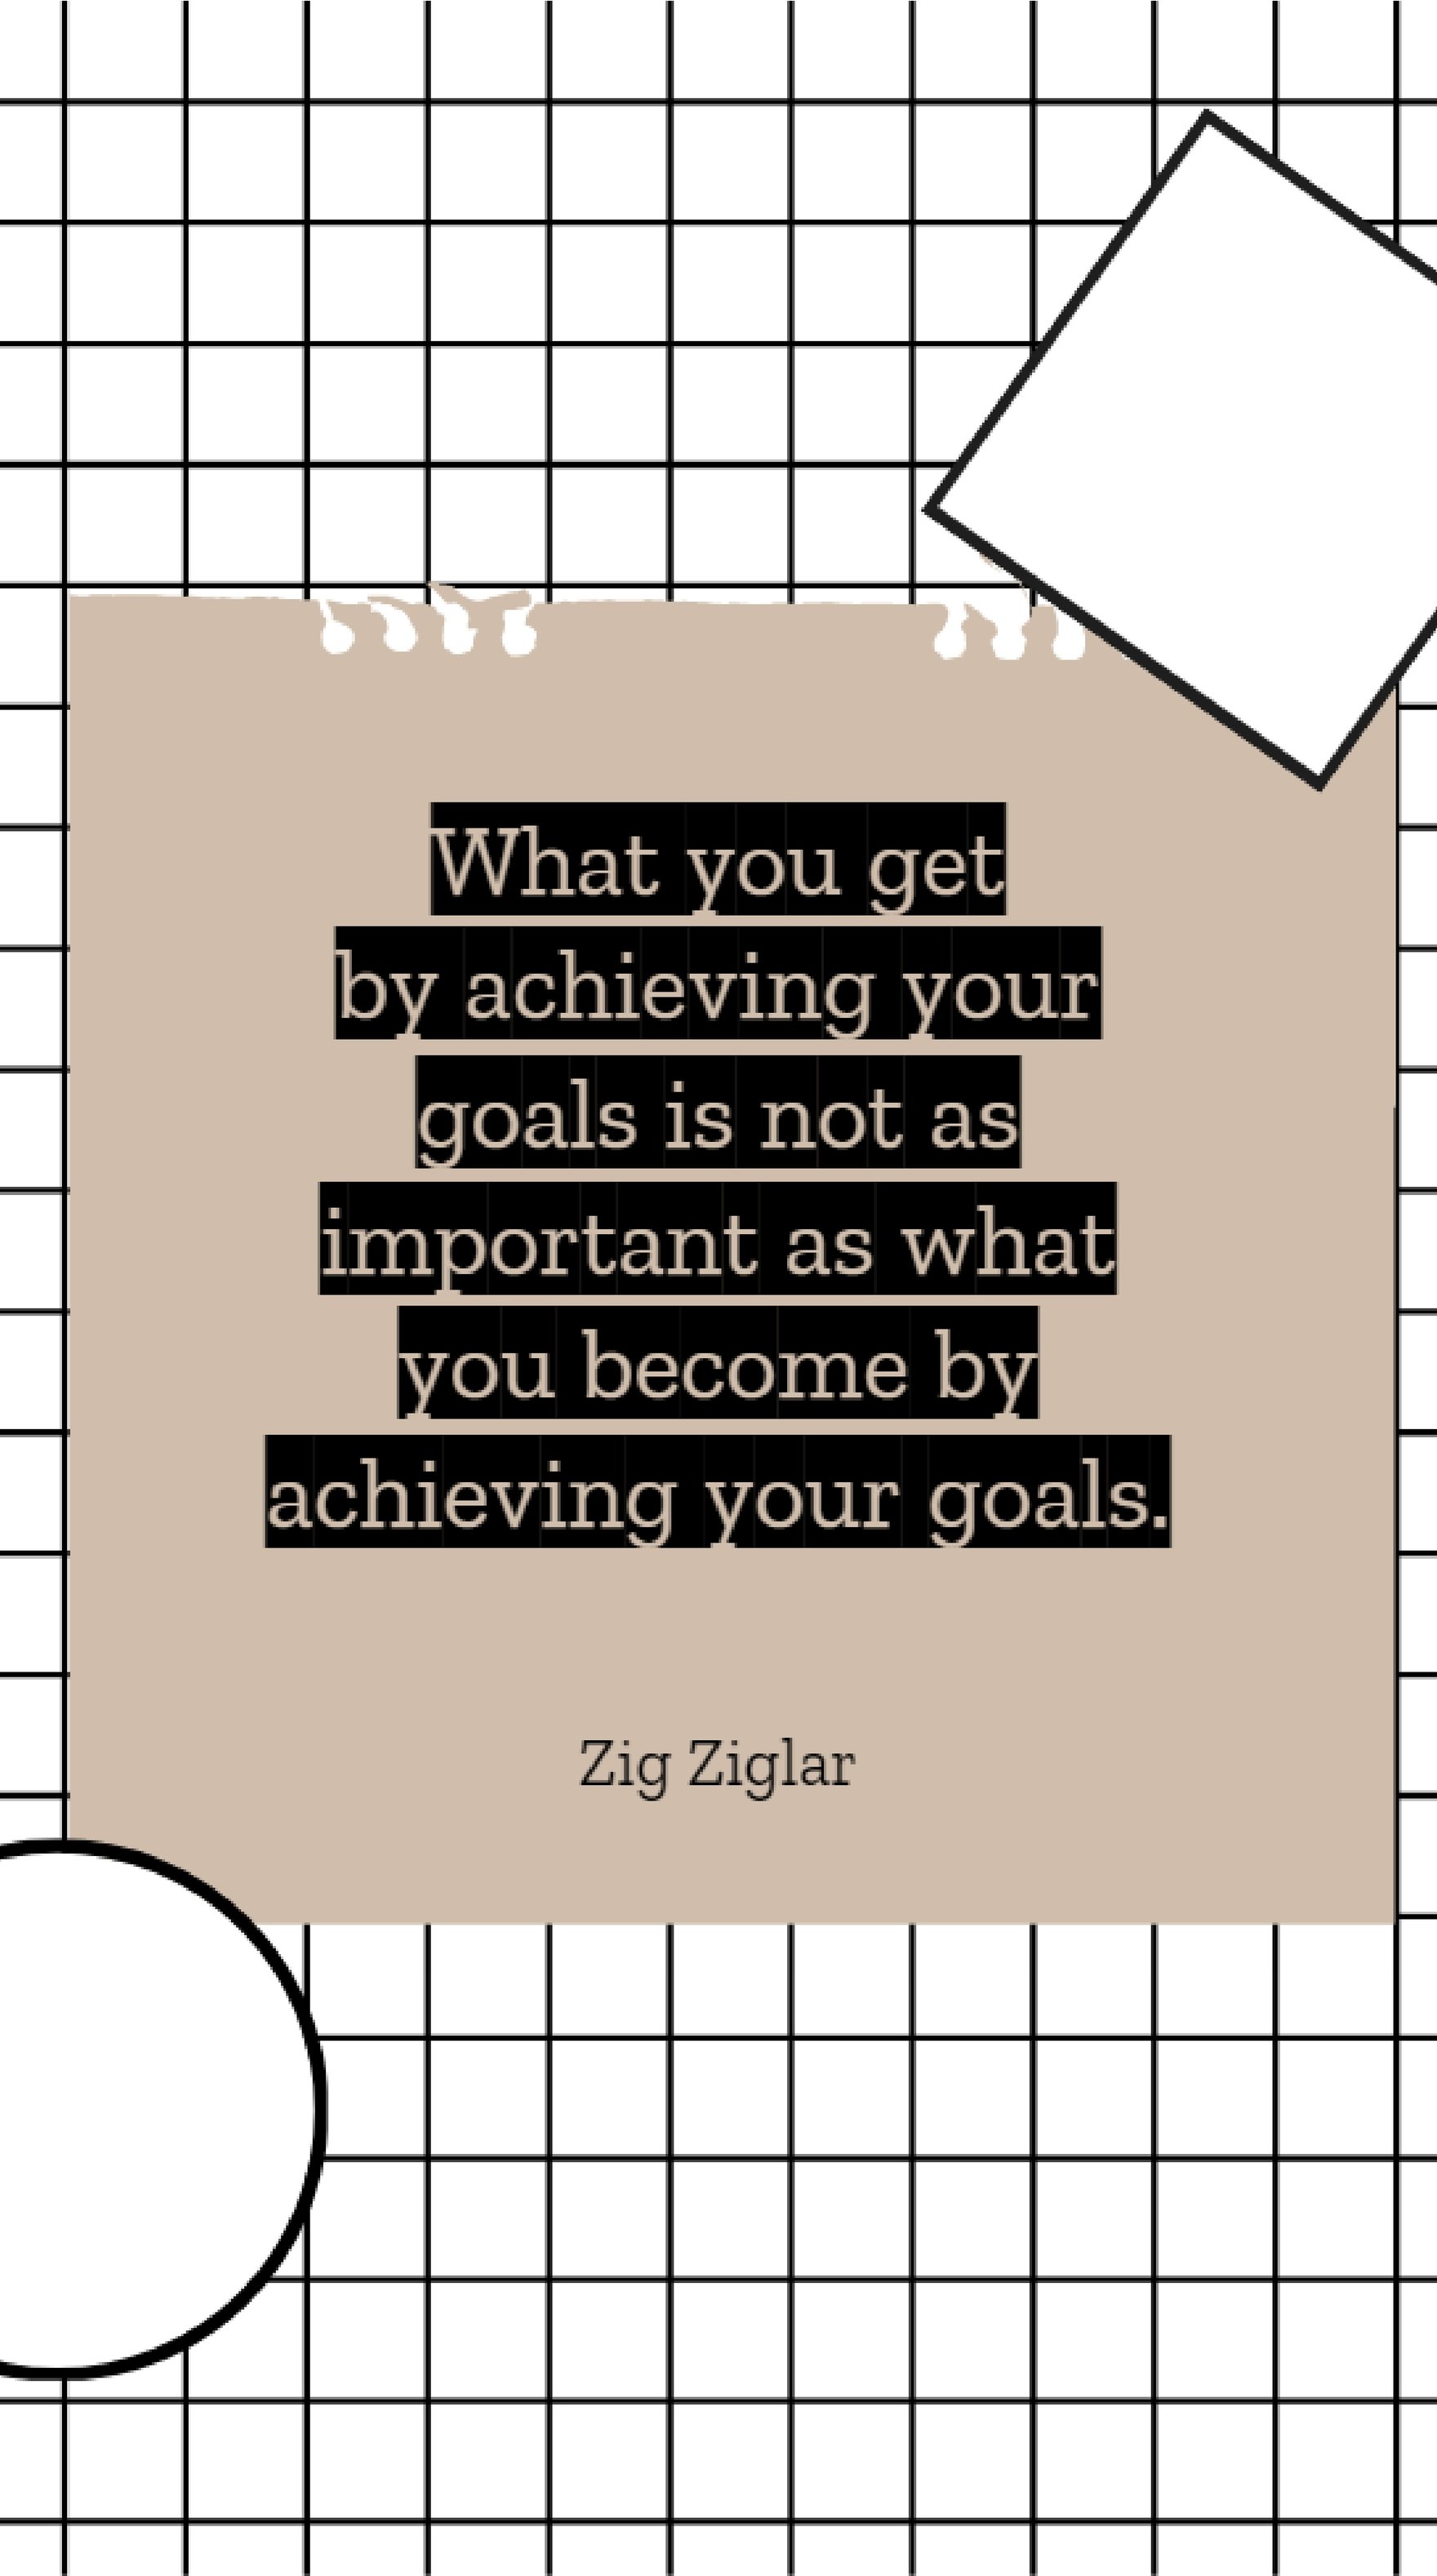 Zig Ziglar - What you get by achieving your goals is not as important as what you become by achieving your goals.